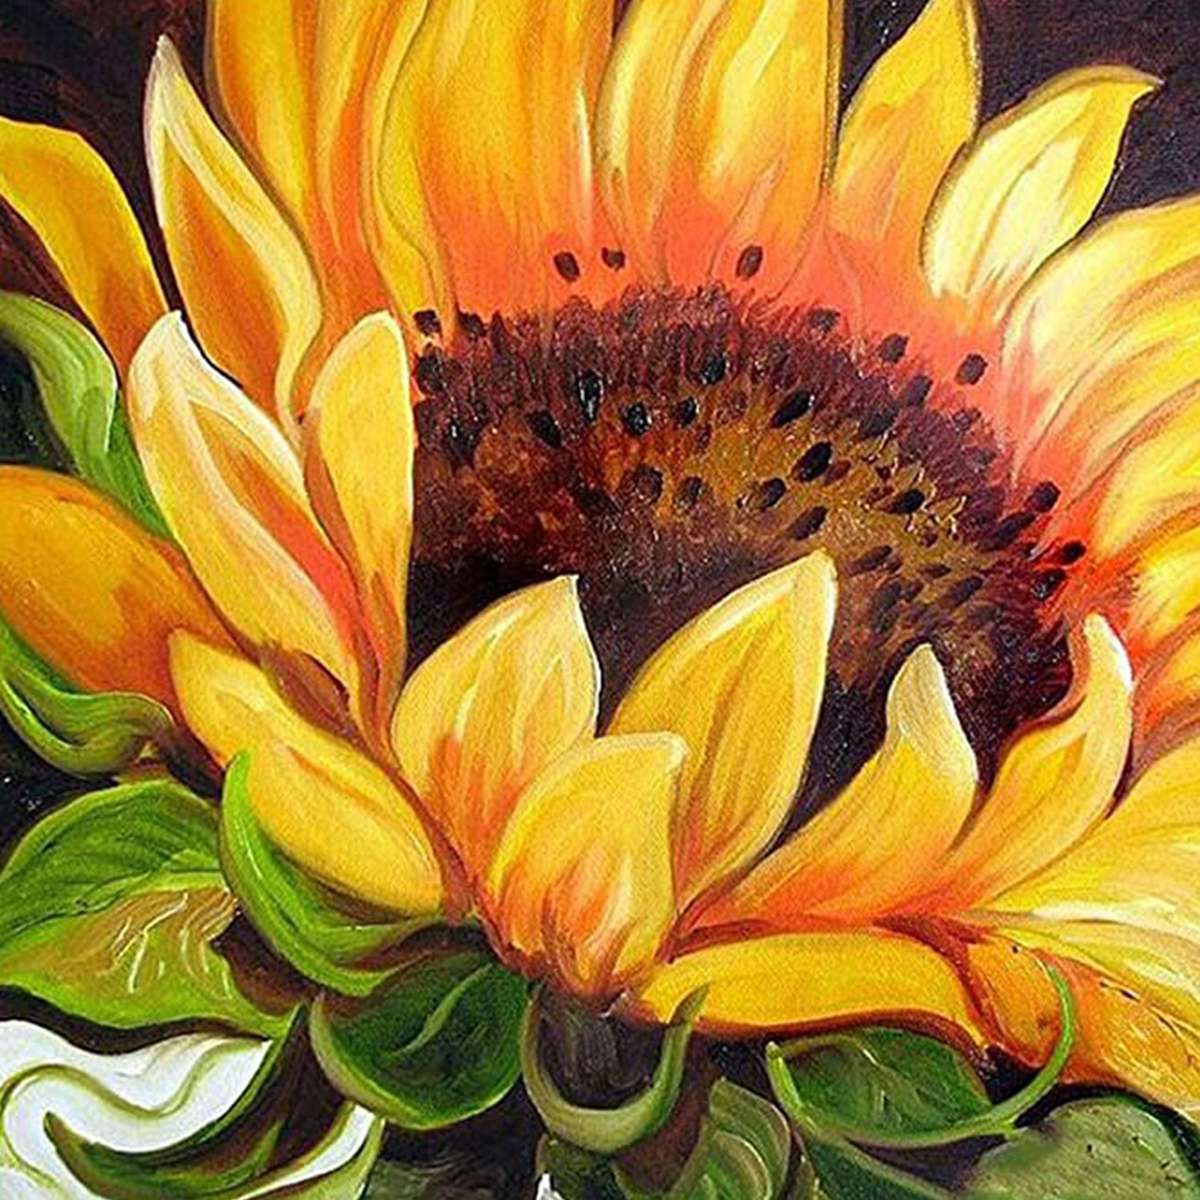 Diy 5d Diamond Painting Sunflower By Number Kits For Adults - Temu